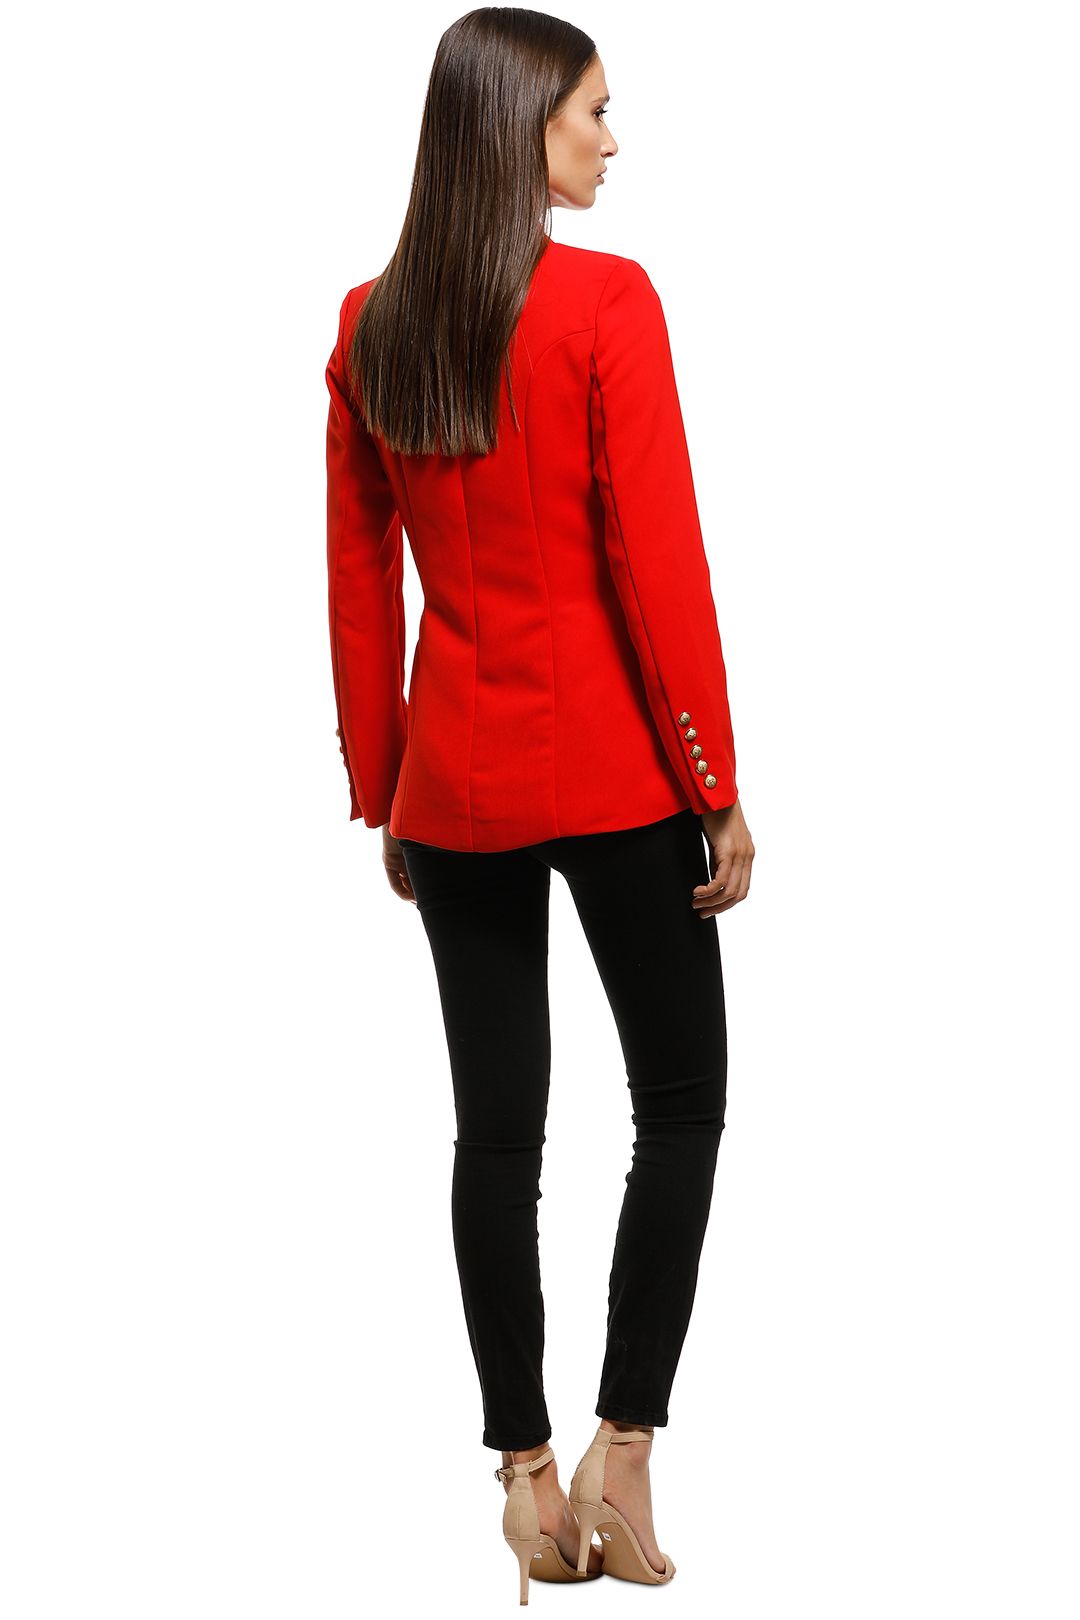 Wish - Expectations Blazer - Red - Back